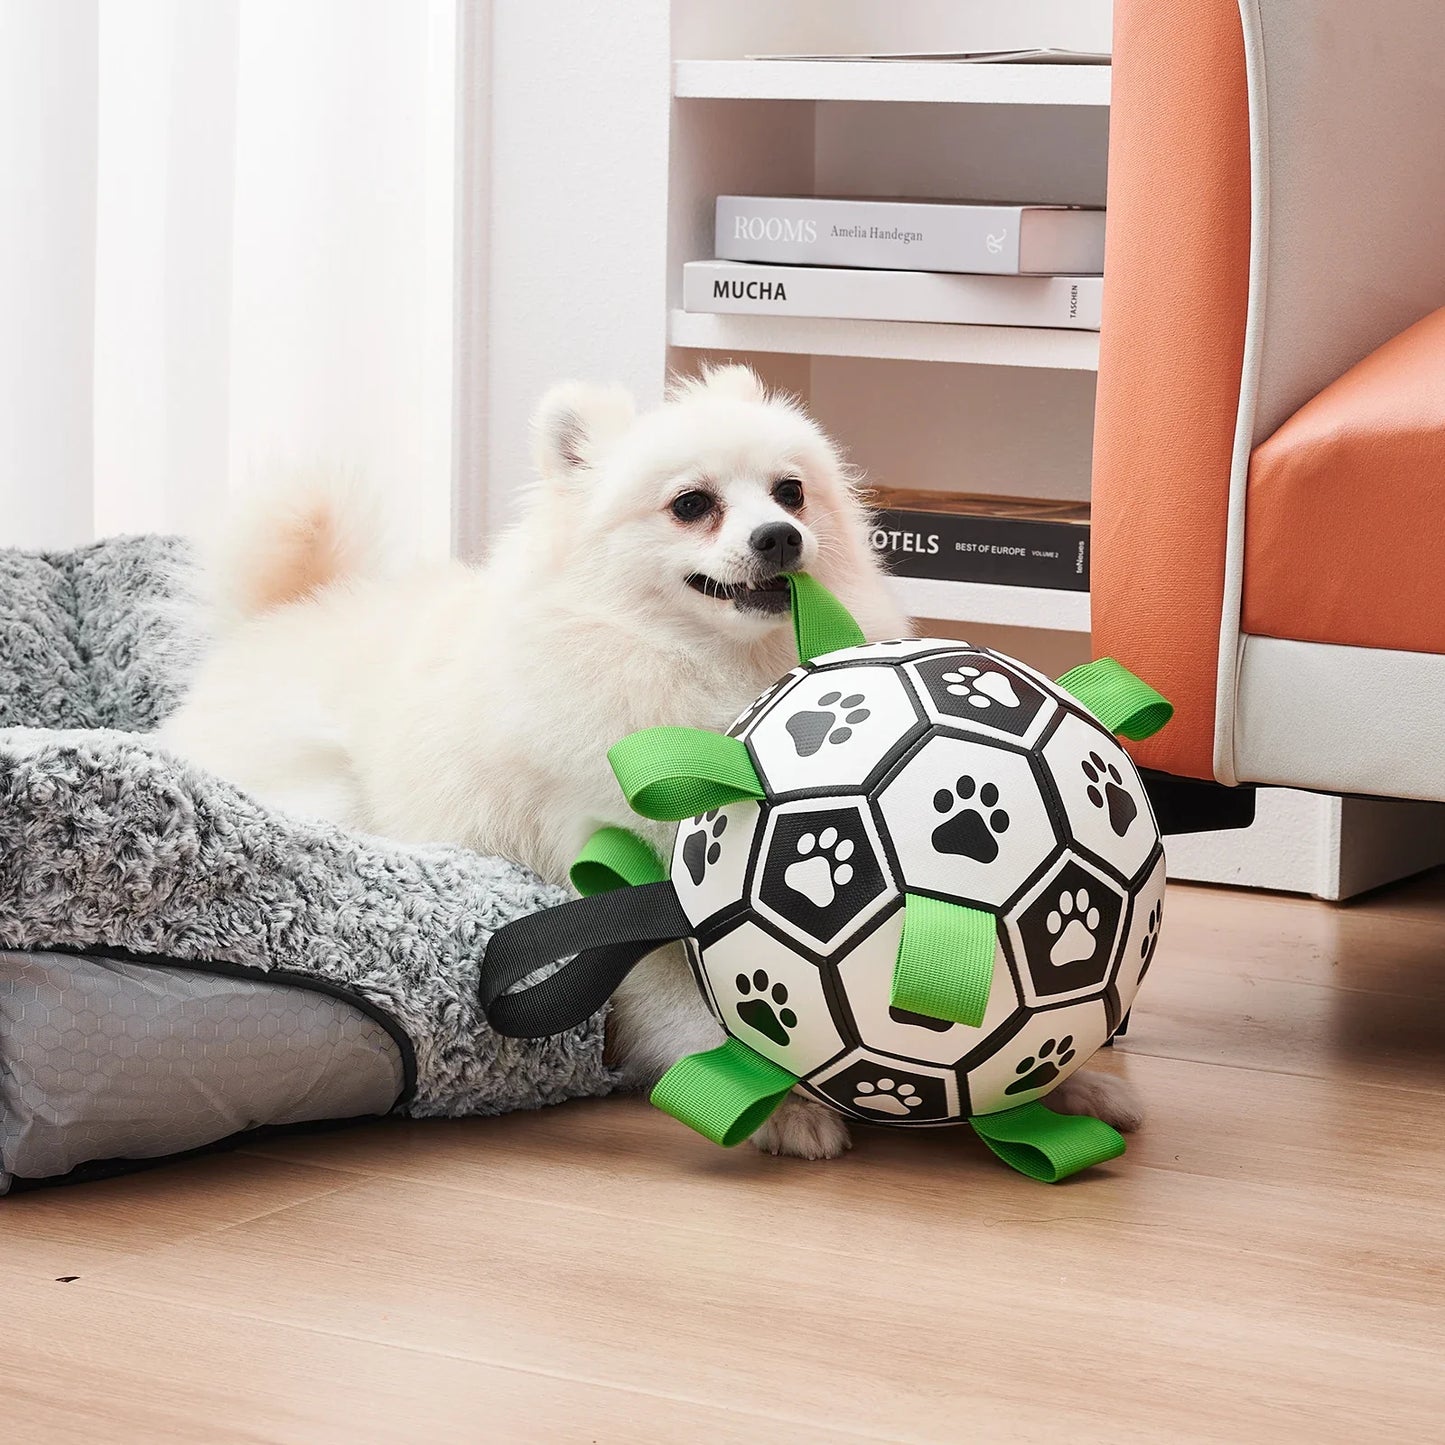 Dog Toys Ball with Straps - TBPETS 